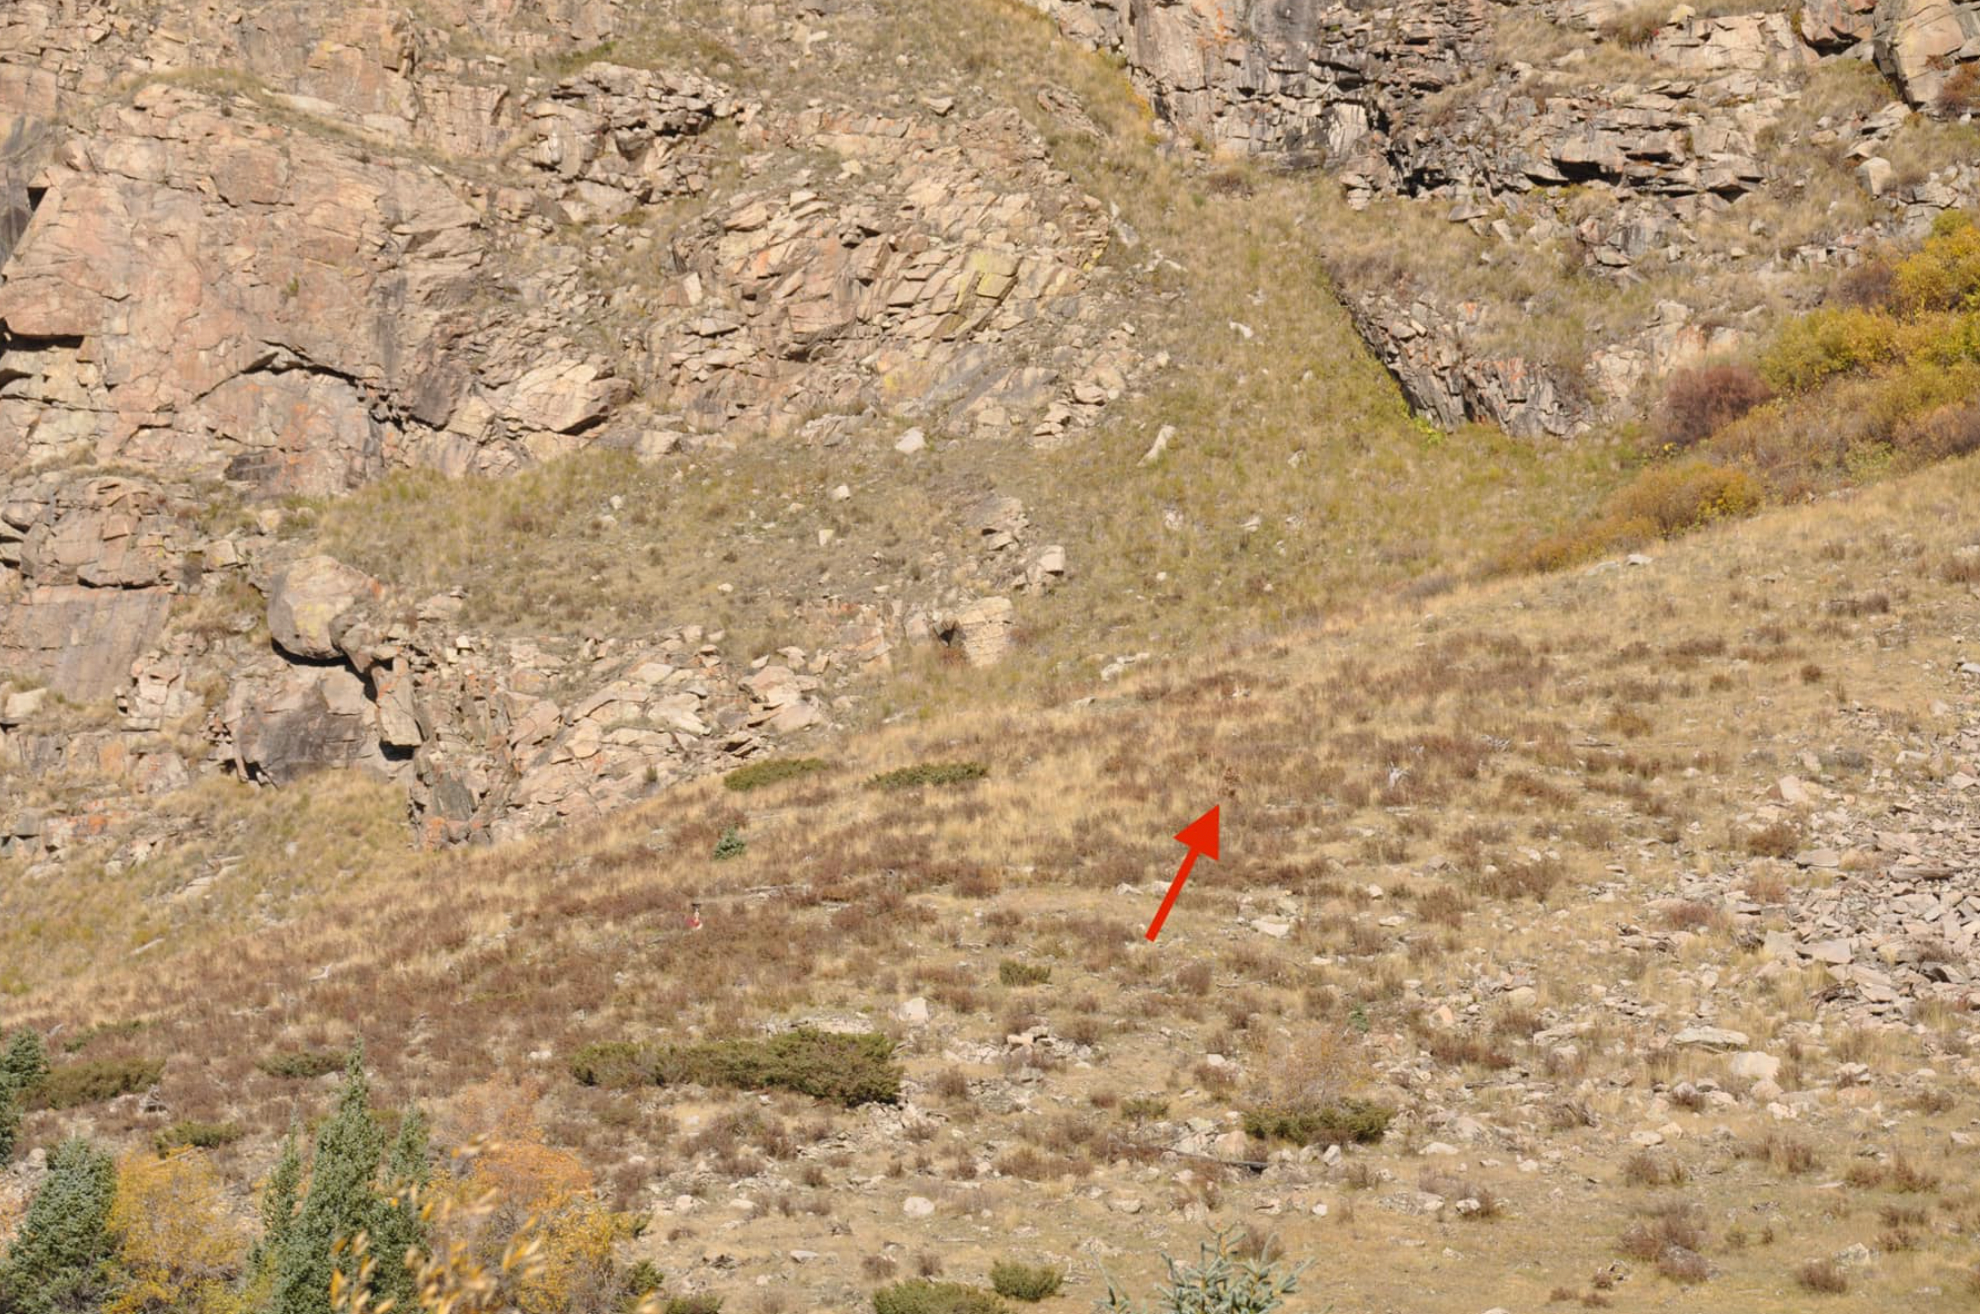 ‘Bigfoot’ spotted walking on mountainside in rural Colorado